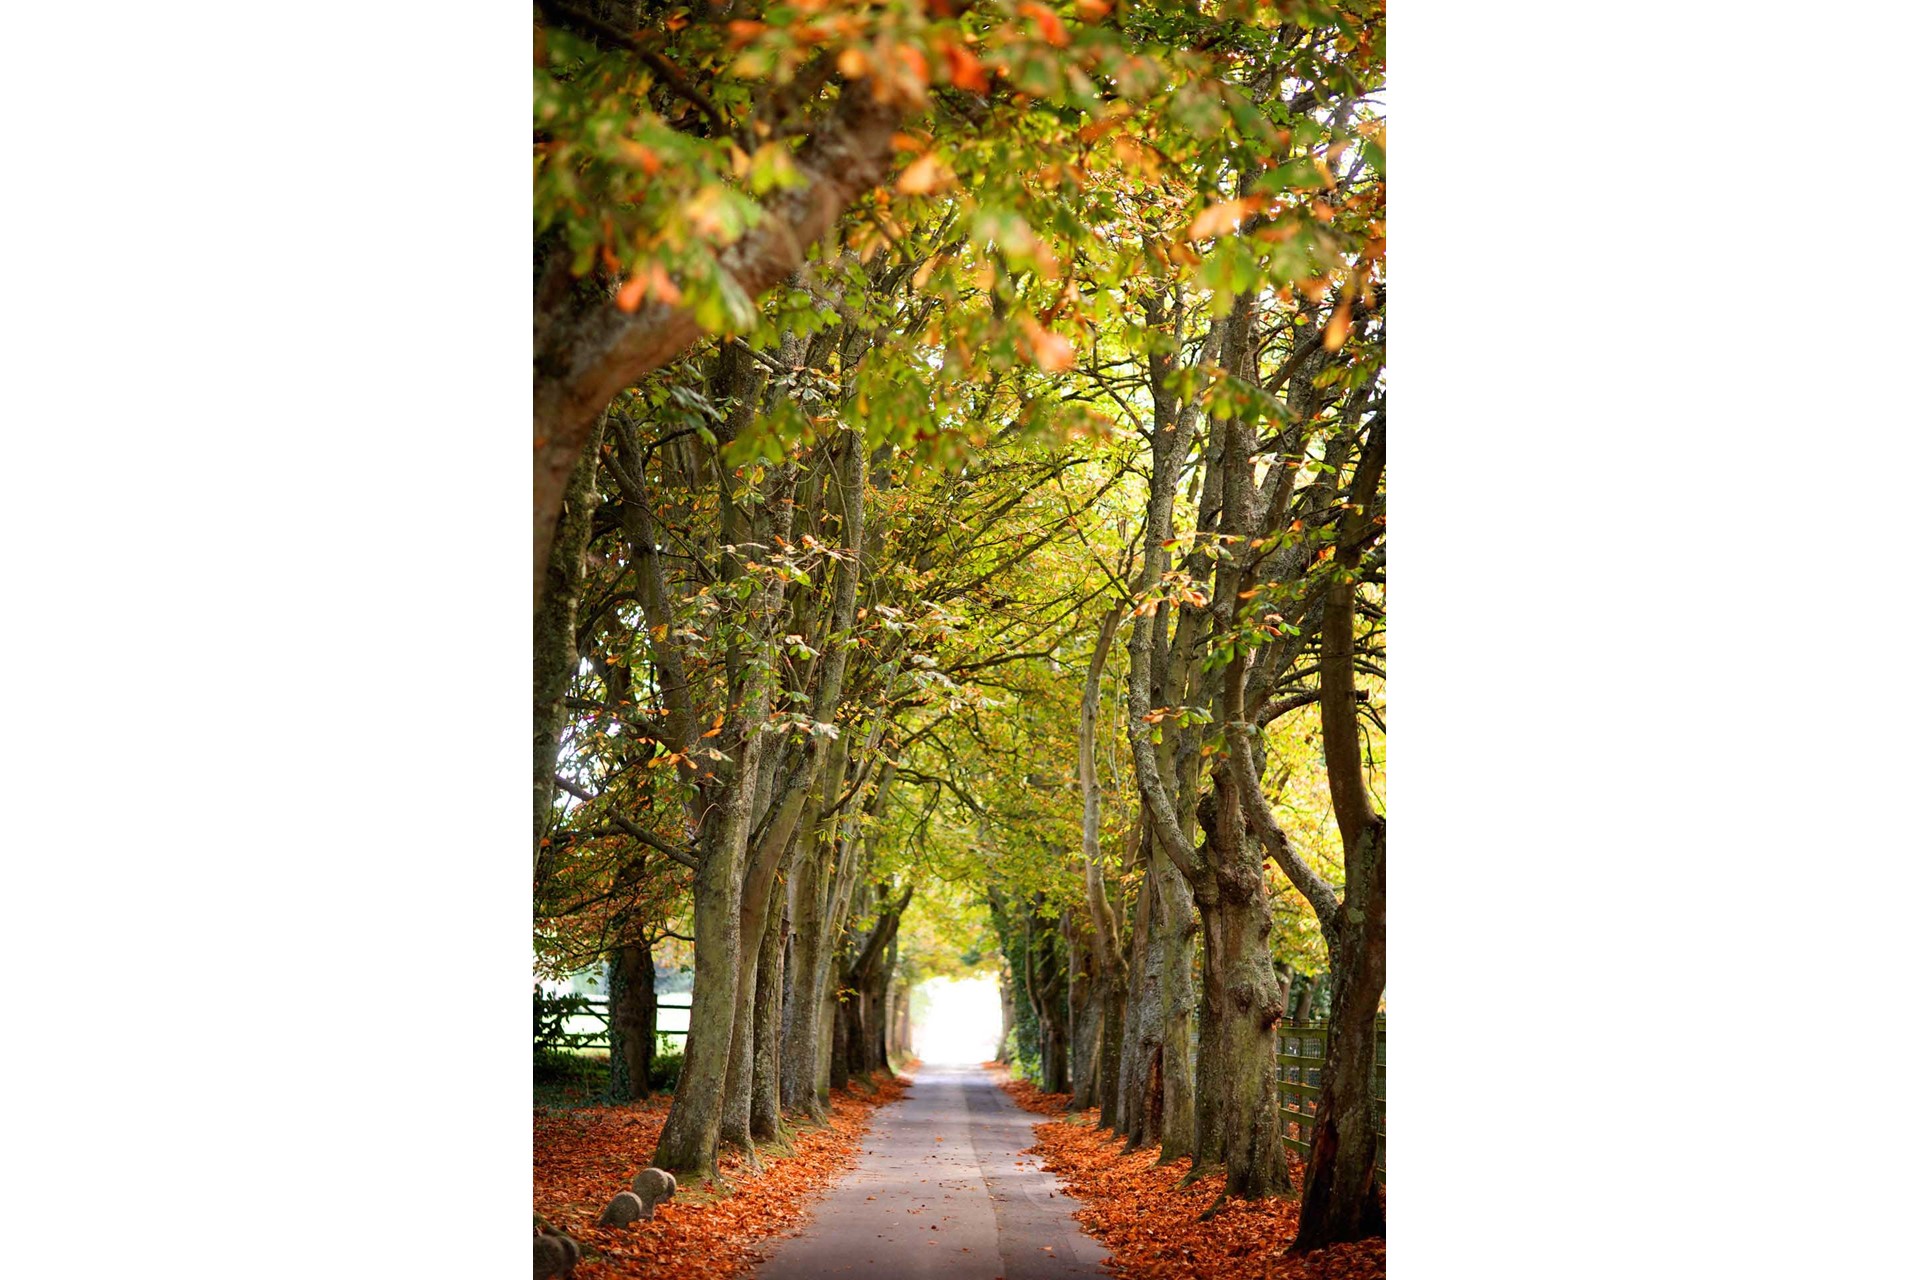 A country lane in autumn